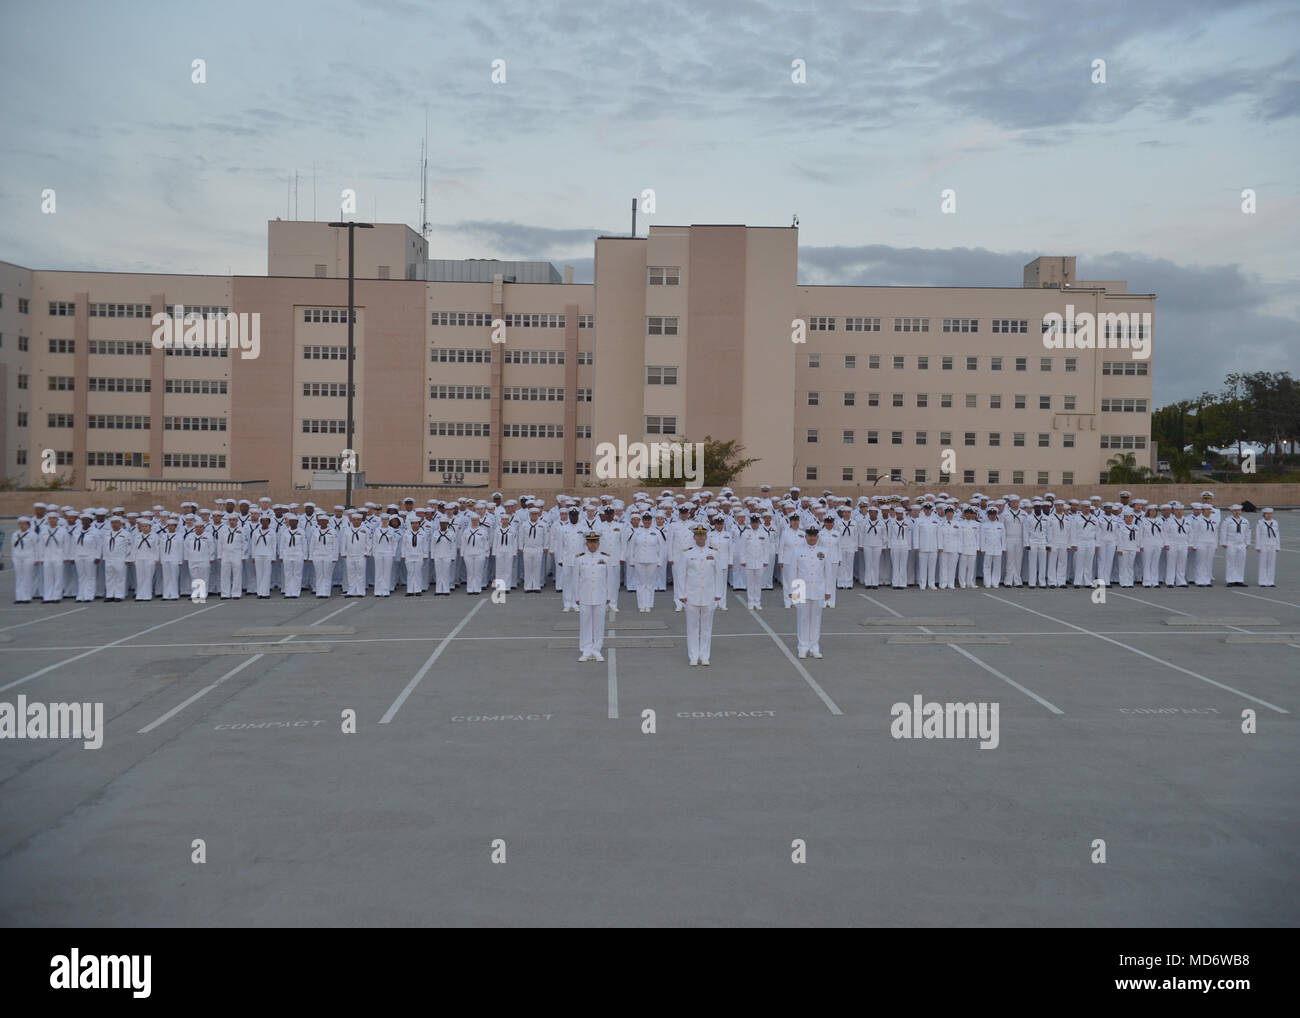 180316-N-PN275-1062 SAN DIEGO (Mar. 16, 2018)  Sailors from Naval Medical Center San Diego”s (NMCSD) Directorate for Administration (DFA) stand in formation for a group photo after an inspection. DFA is committed to providing quality, timely, innovative and economical healthcare administration to staff and patients of NMCSD. (U.S. Navy Photo by Mass Communication Specialist 2nd Class Zachary Kreitzer) Stock Photo